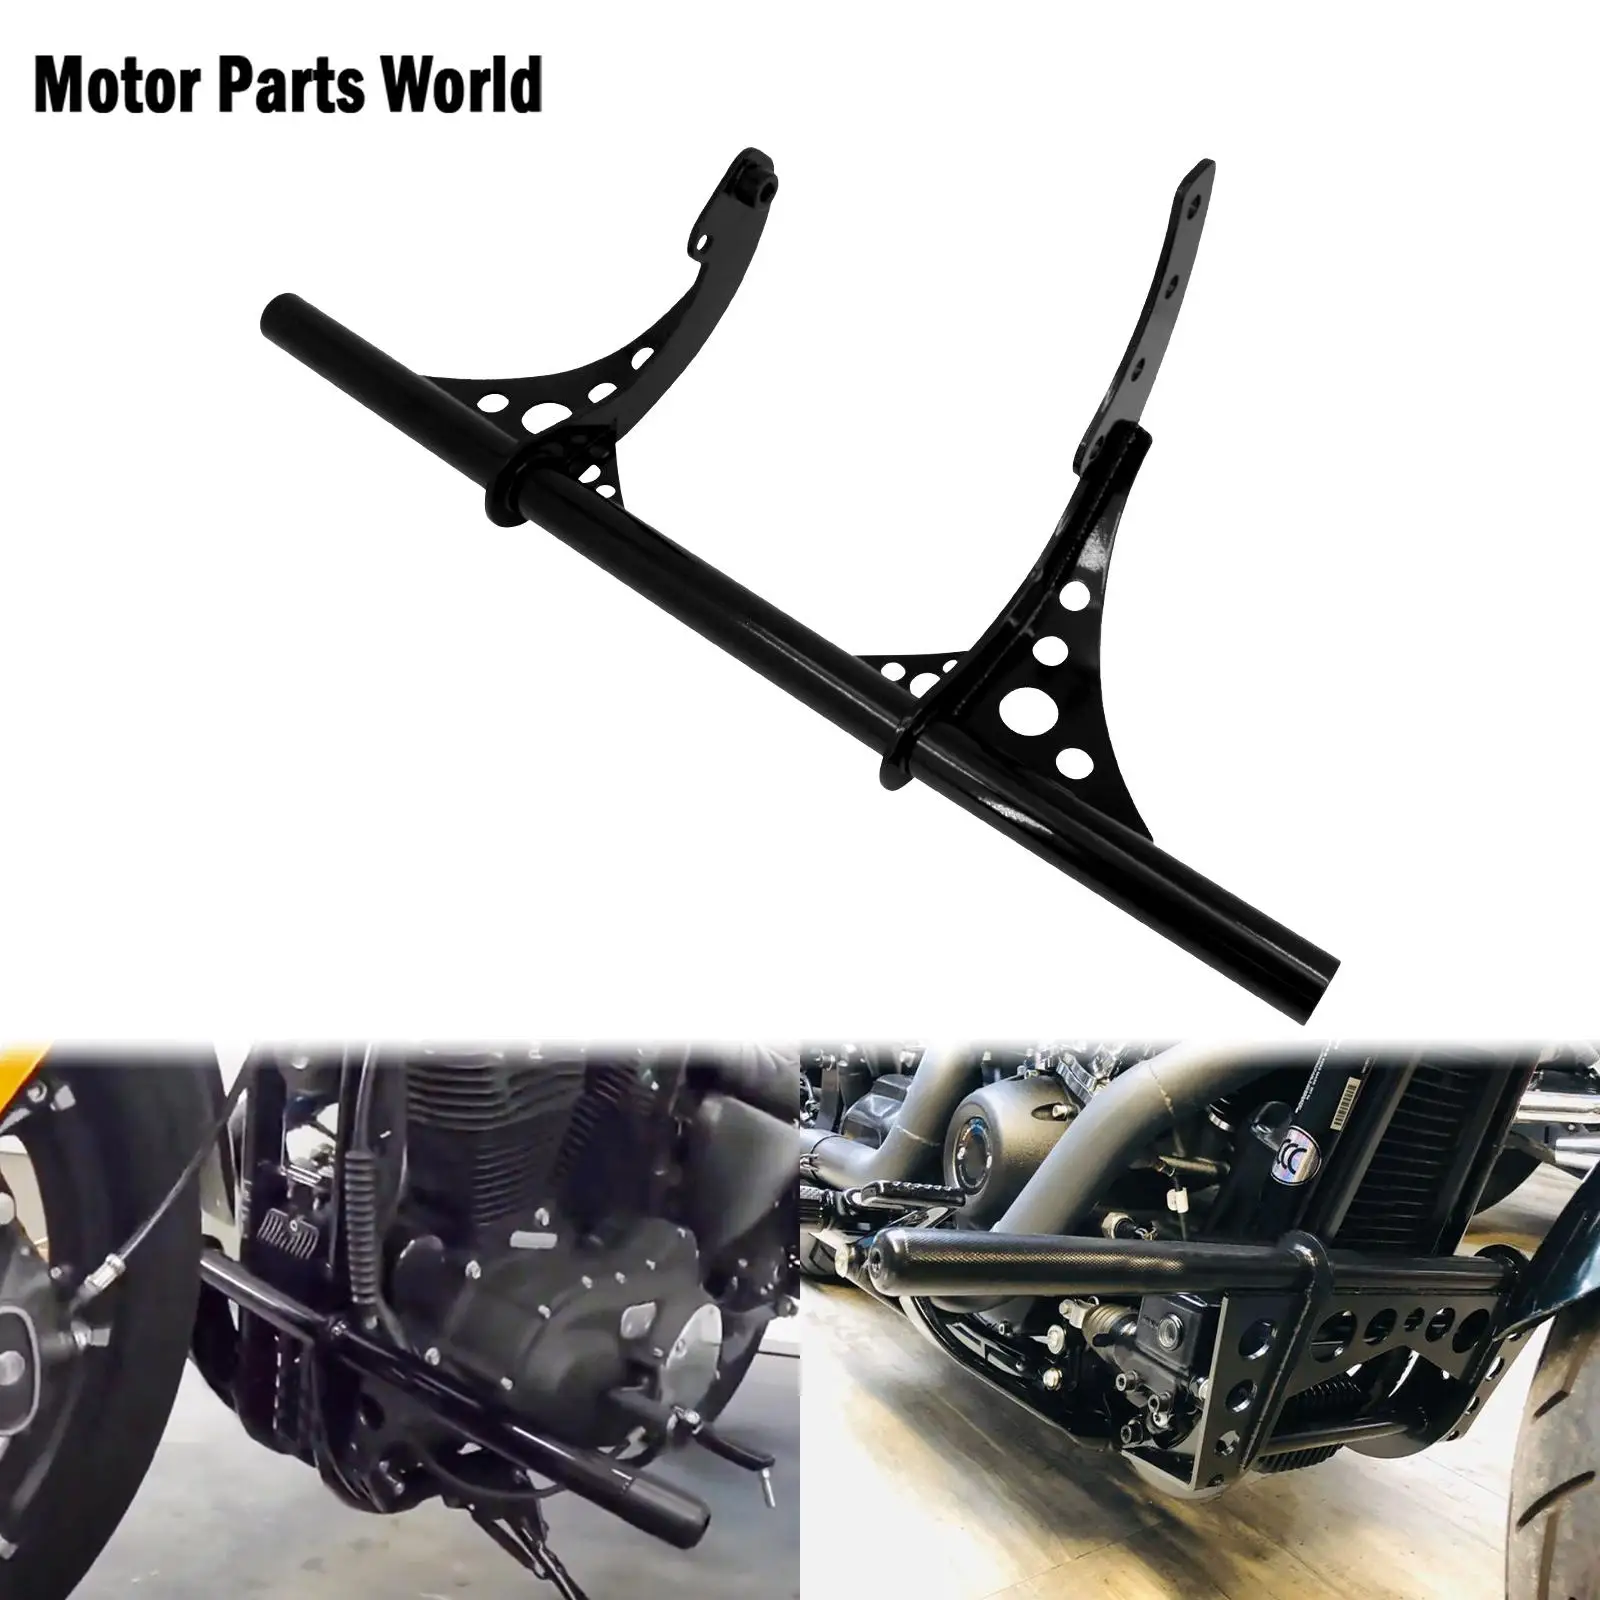 

Motorcycle Falling Protection Highway Engine Guard Crash Bar Steel For Harley Softail Street Bob FXBB Low Rider 2018 2019 2020